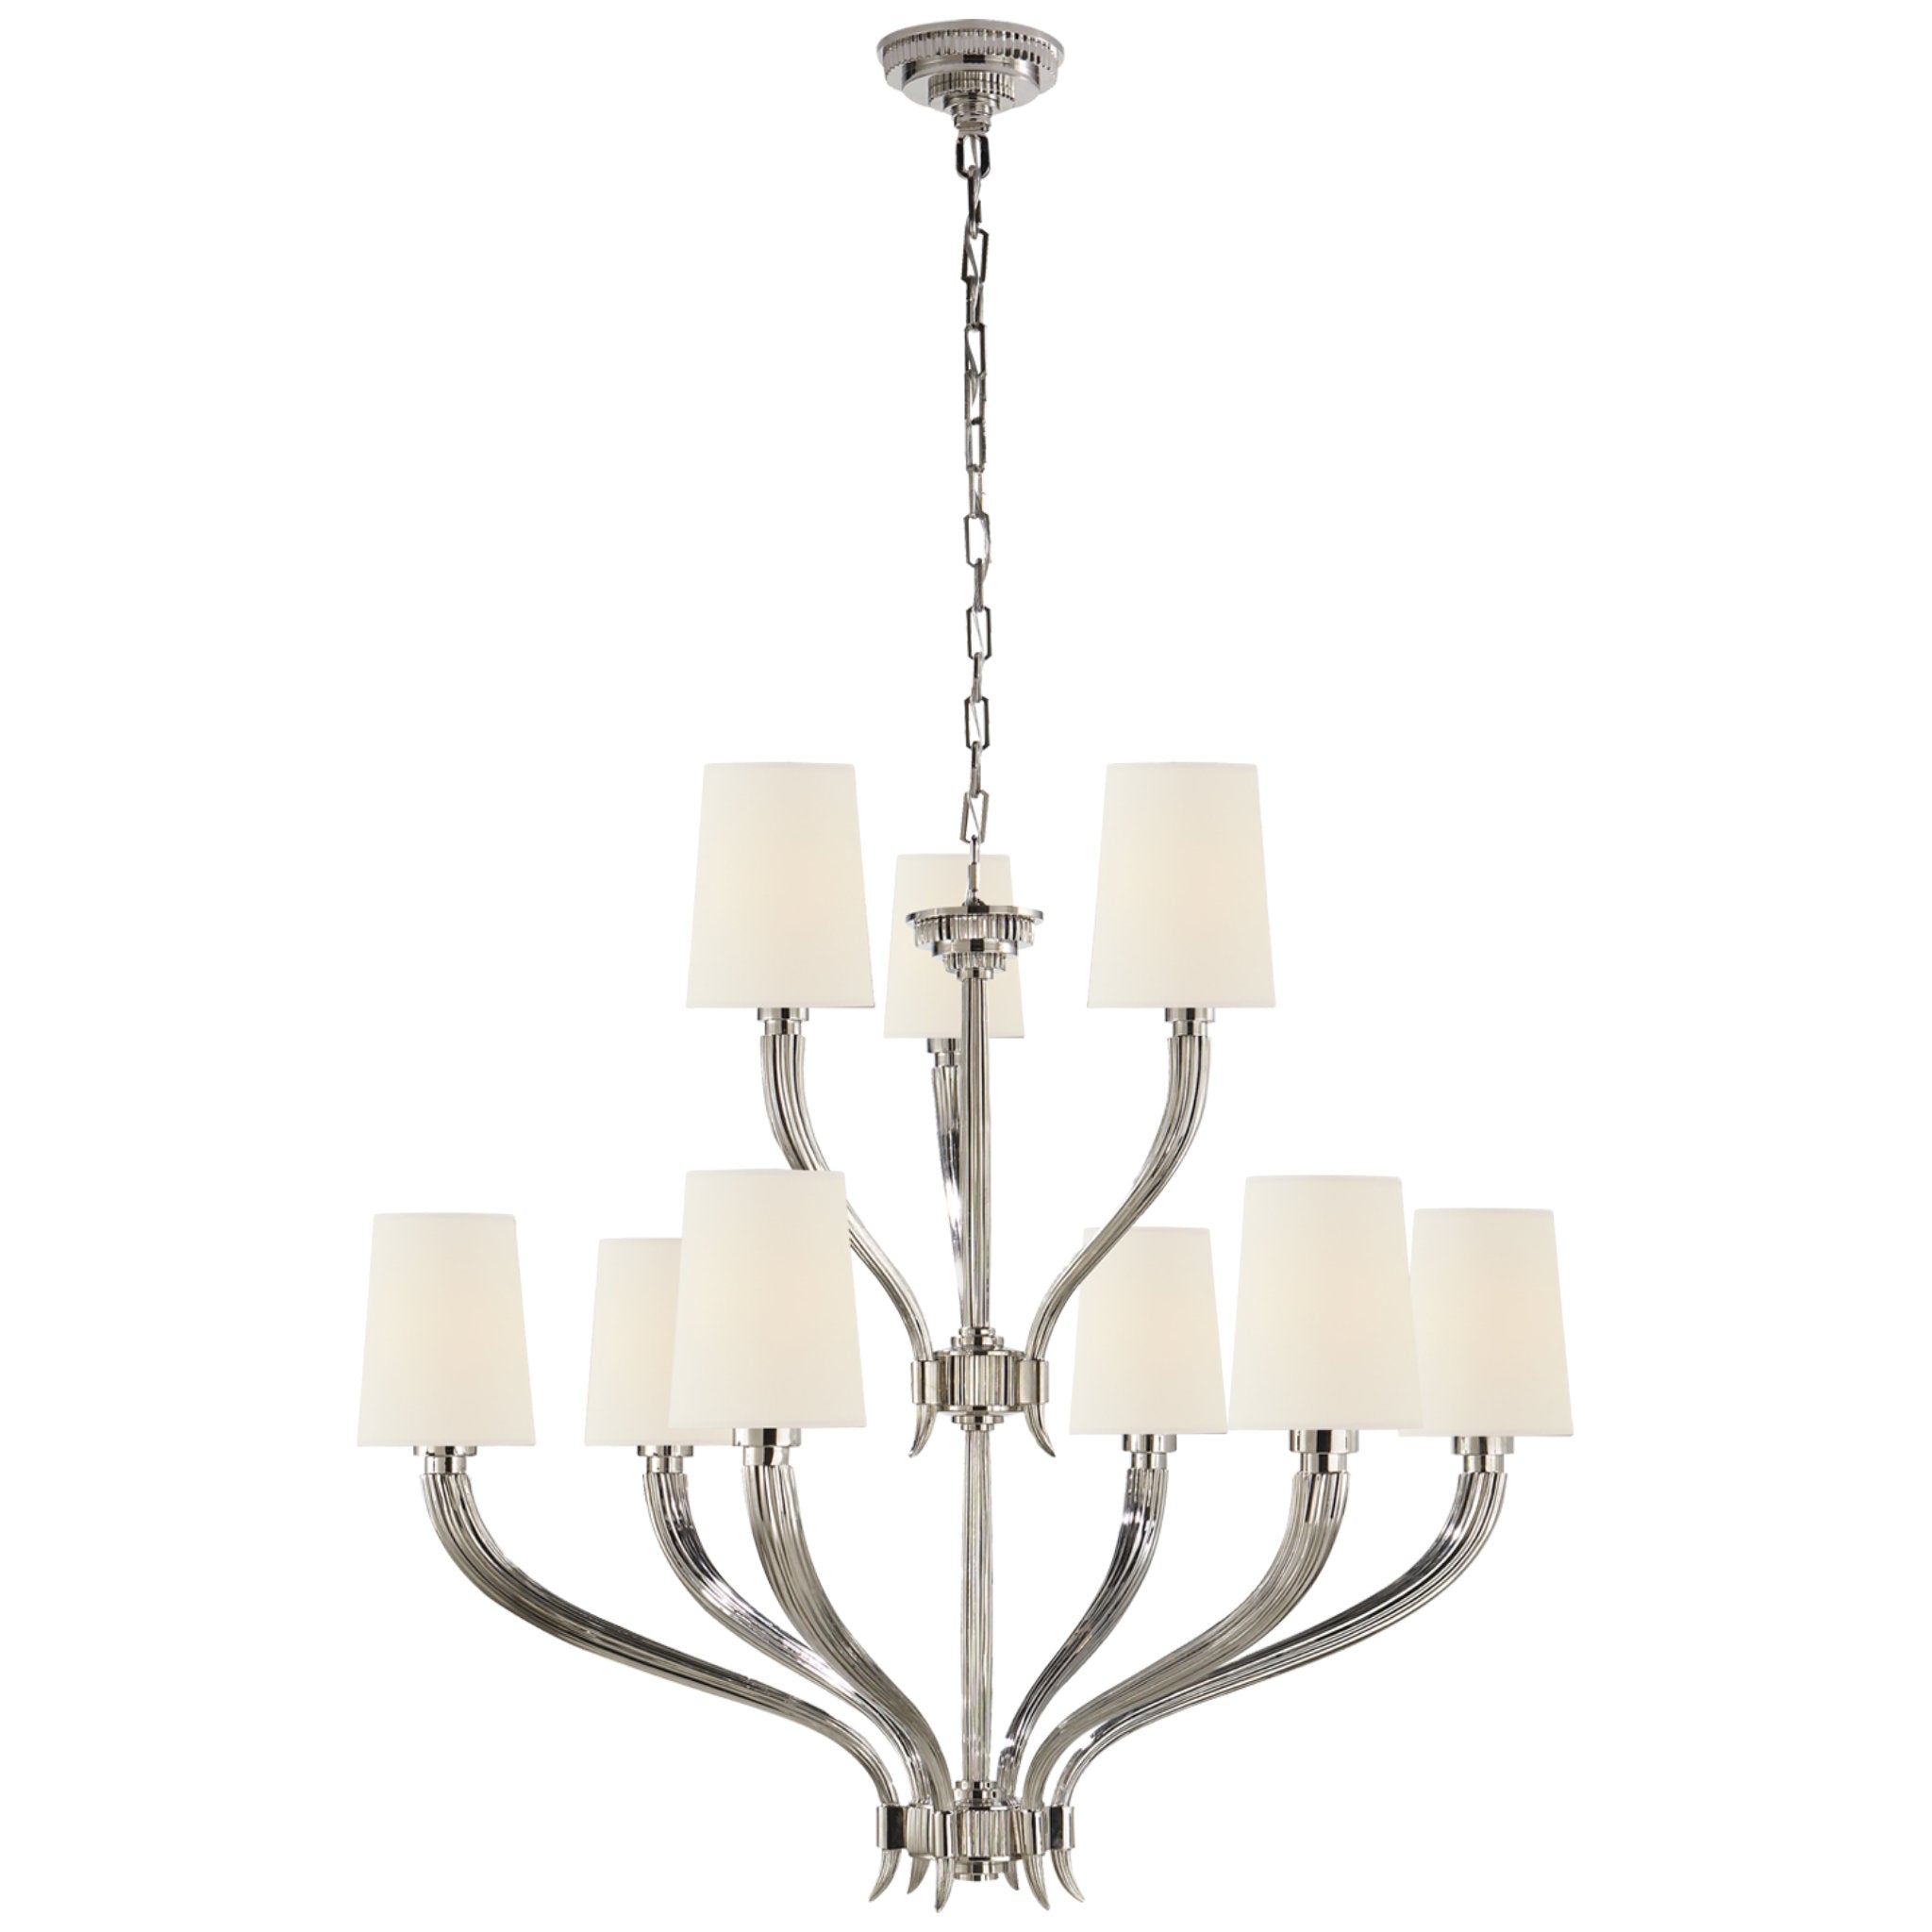 Chapman & Myers Ruhlmann 2-Tier Chandelier in Polished Nickel with Linen Shades